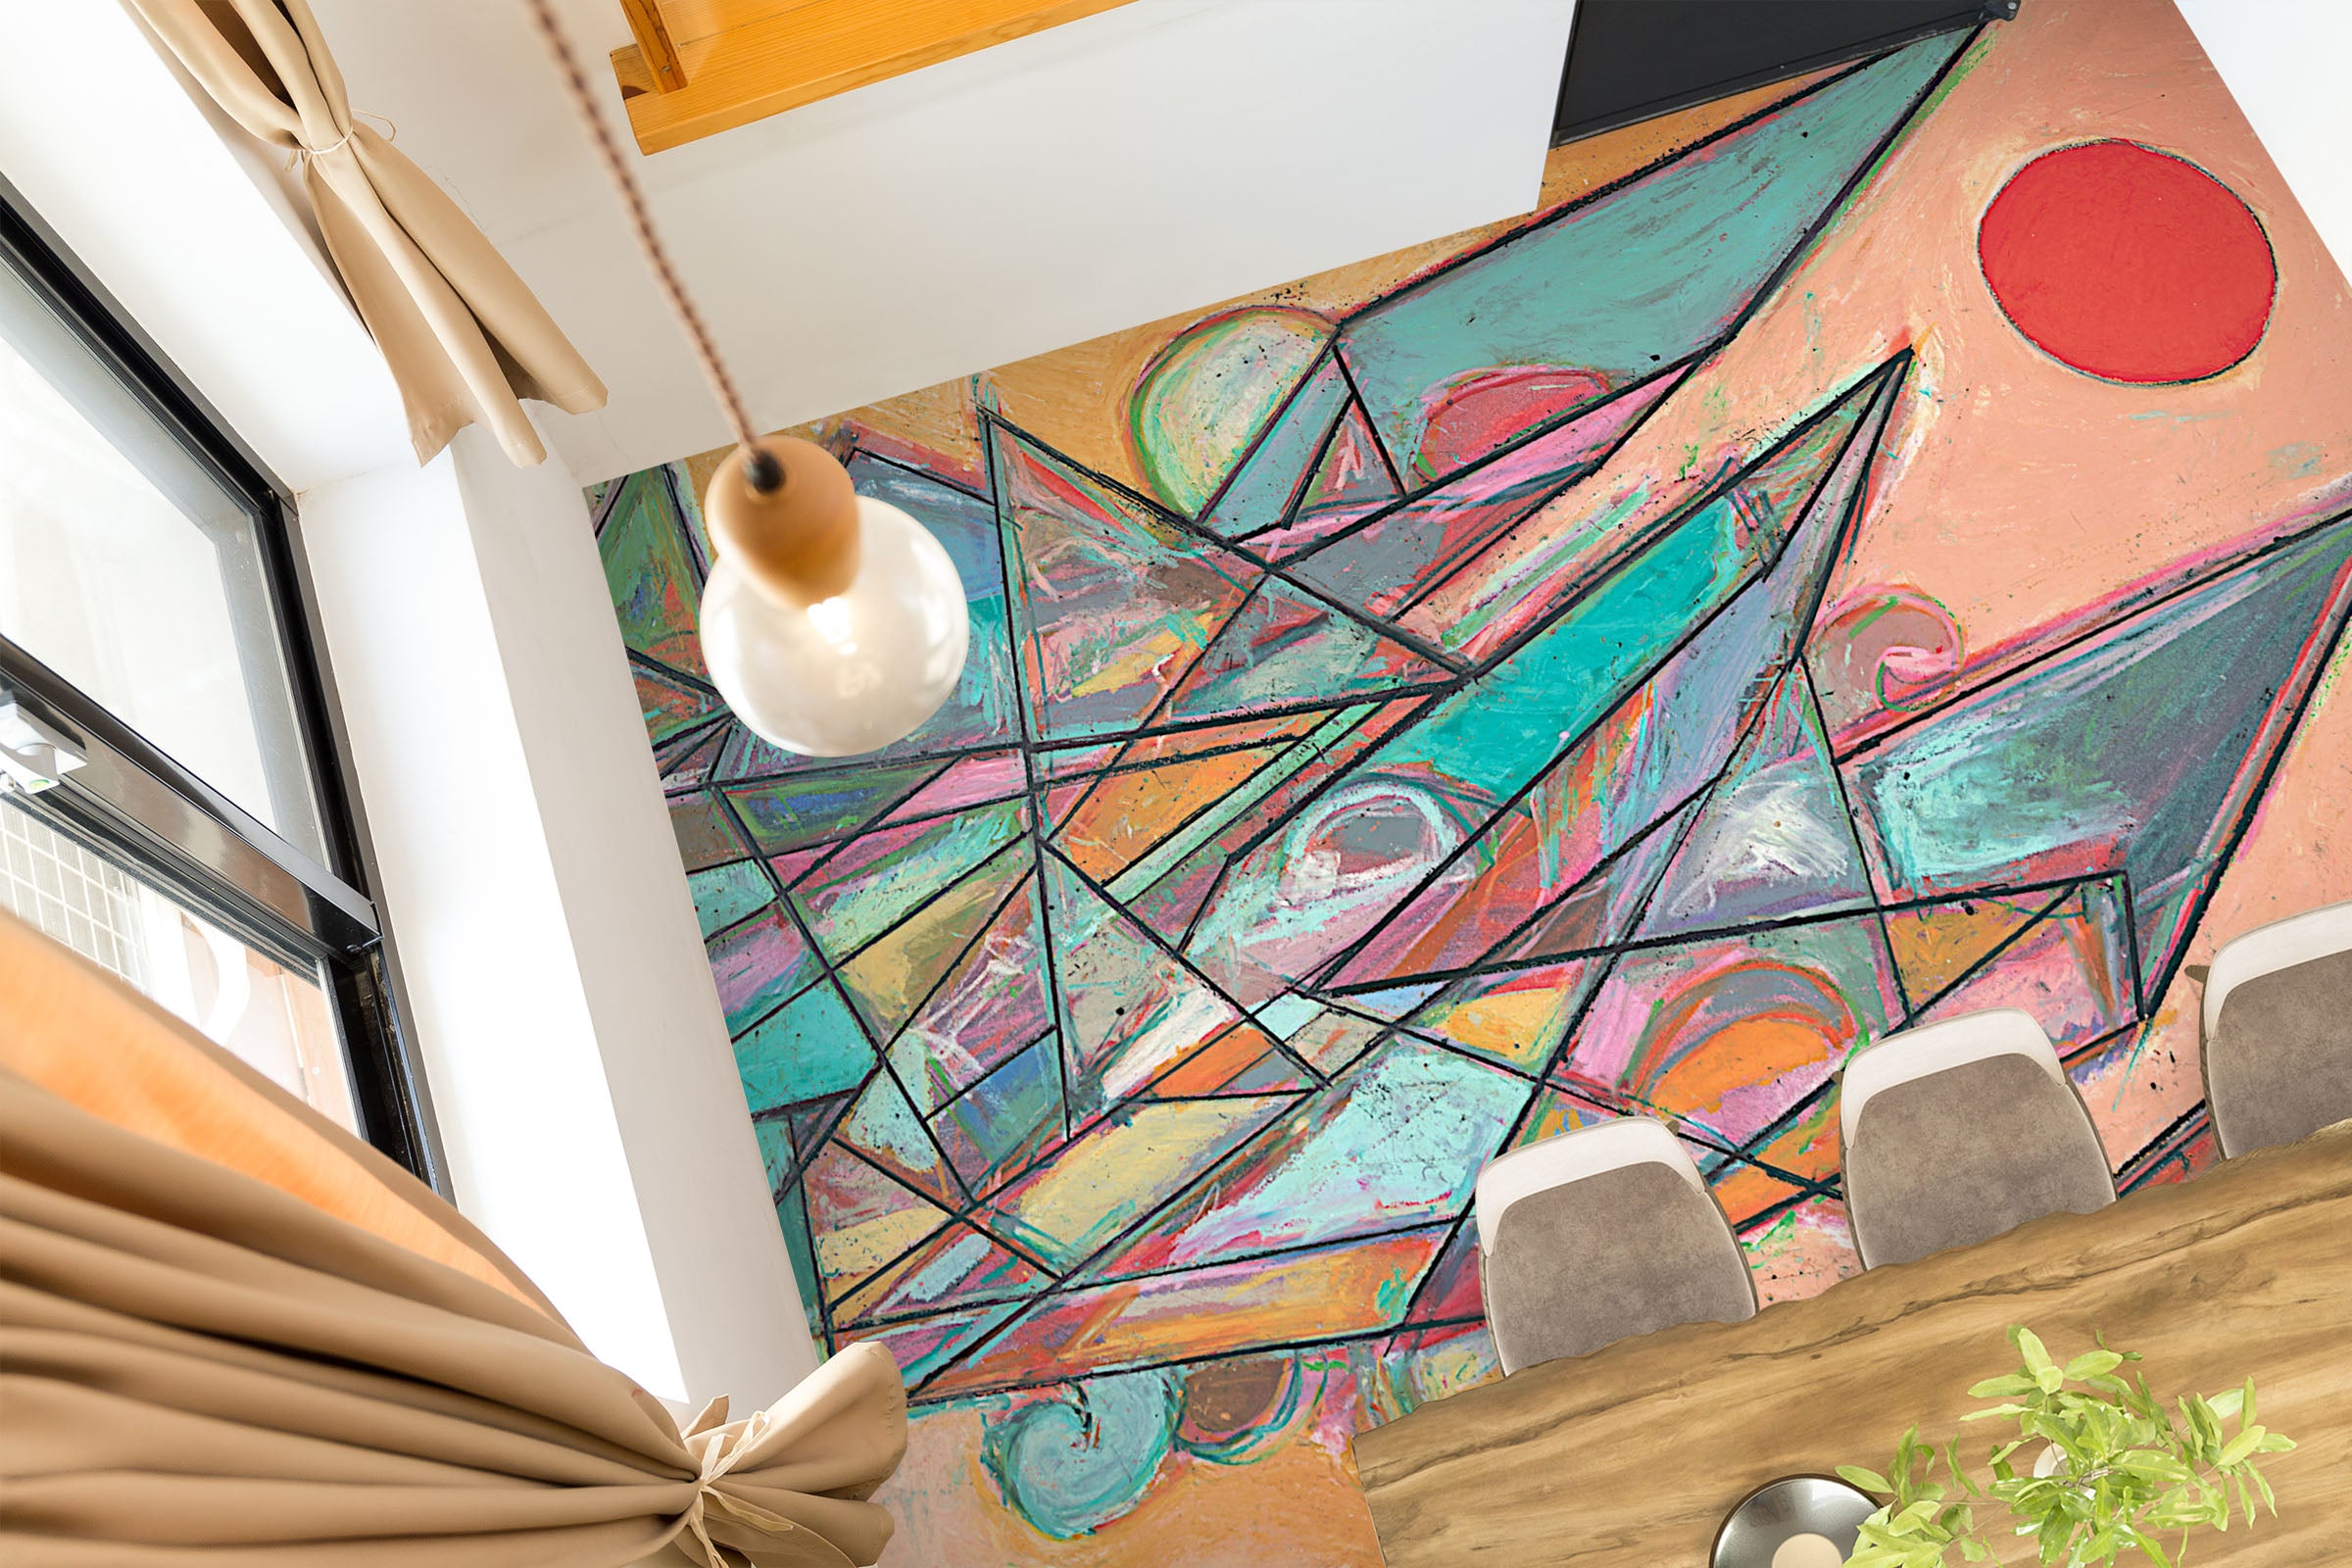 3D Triangle Lines Painting 9942 Allan P. Friedlander Floor Mural  Wallpaper Murals Self-Adhesive Removable Print Epoxy